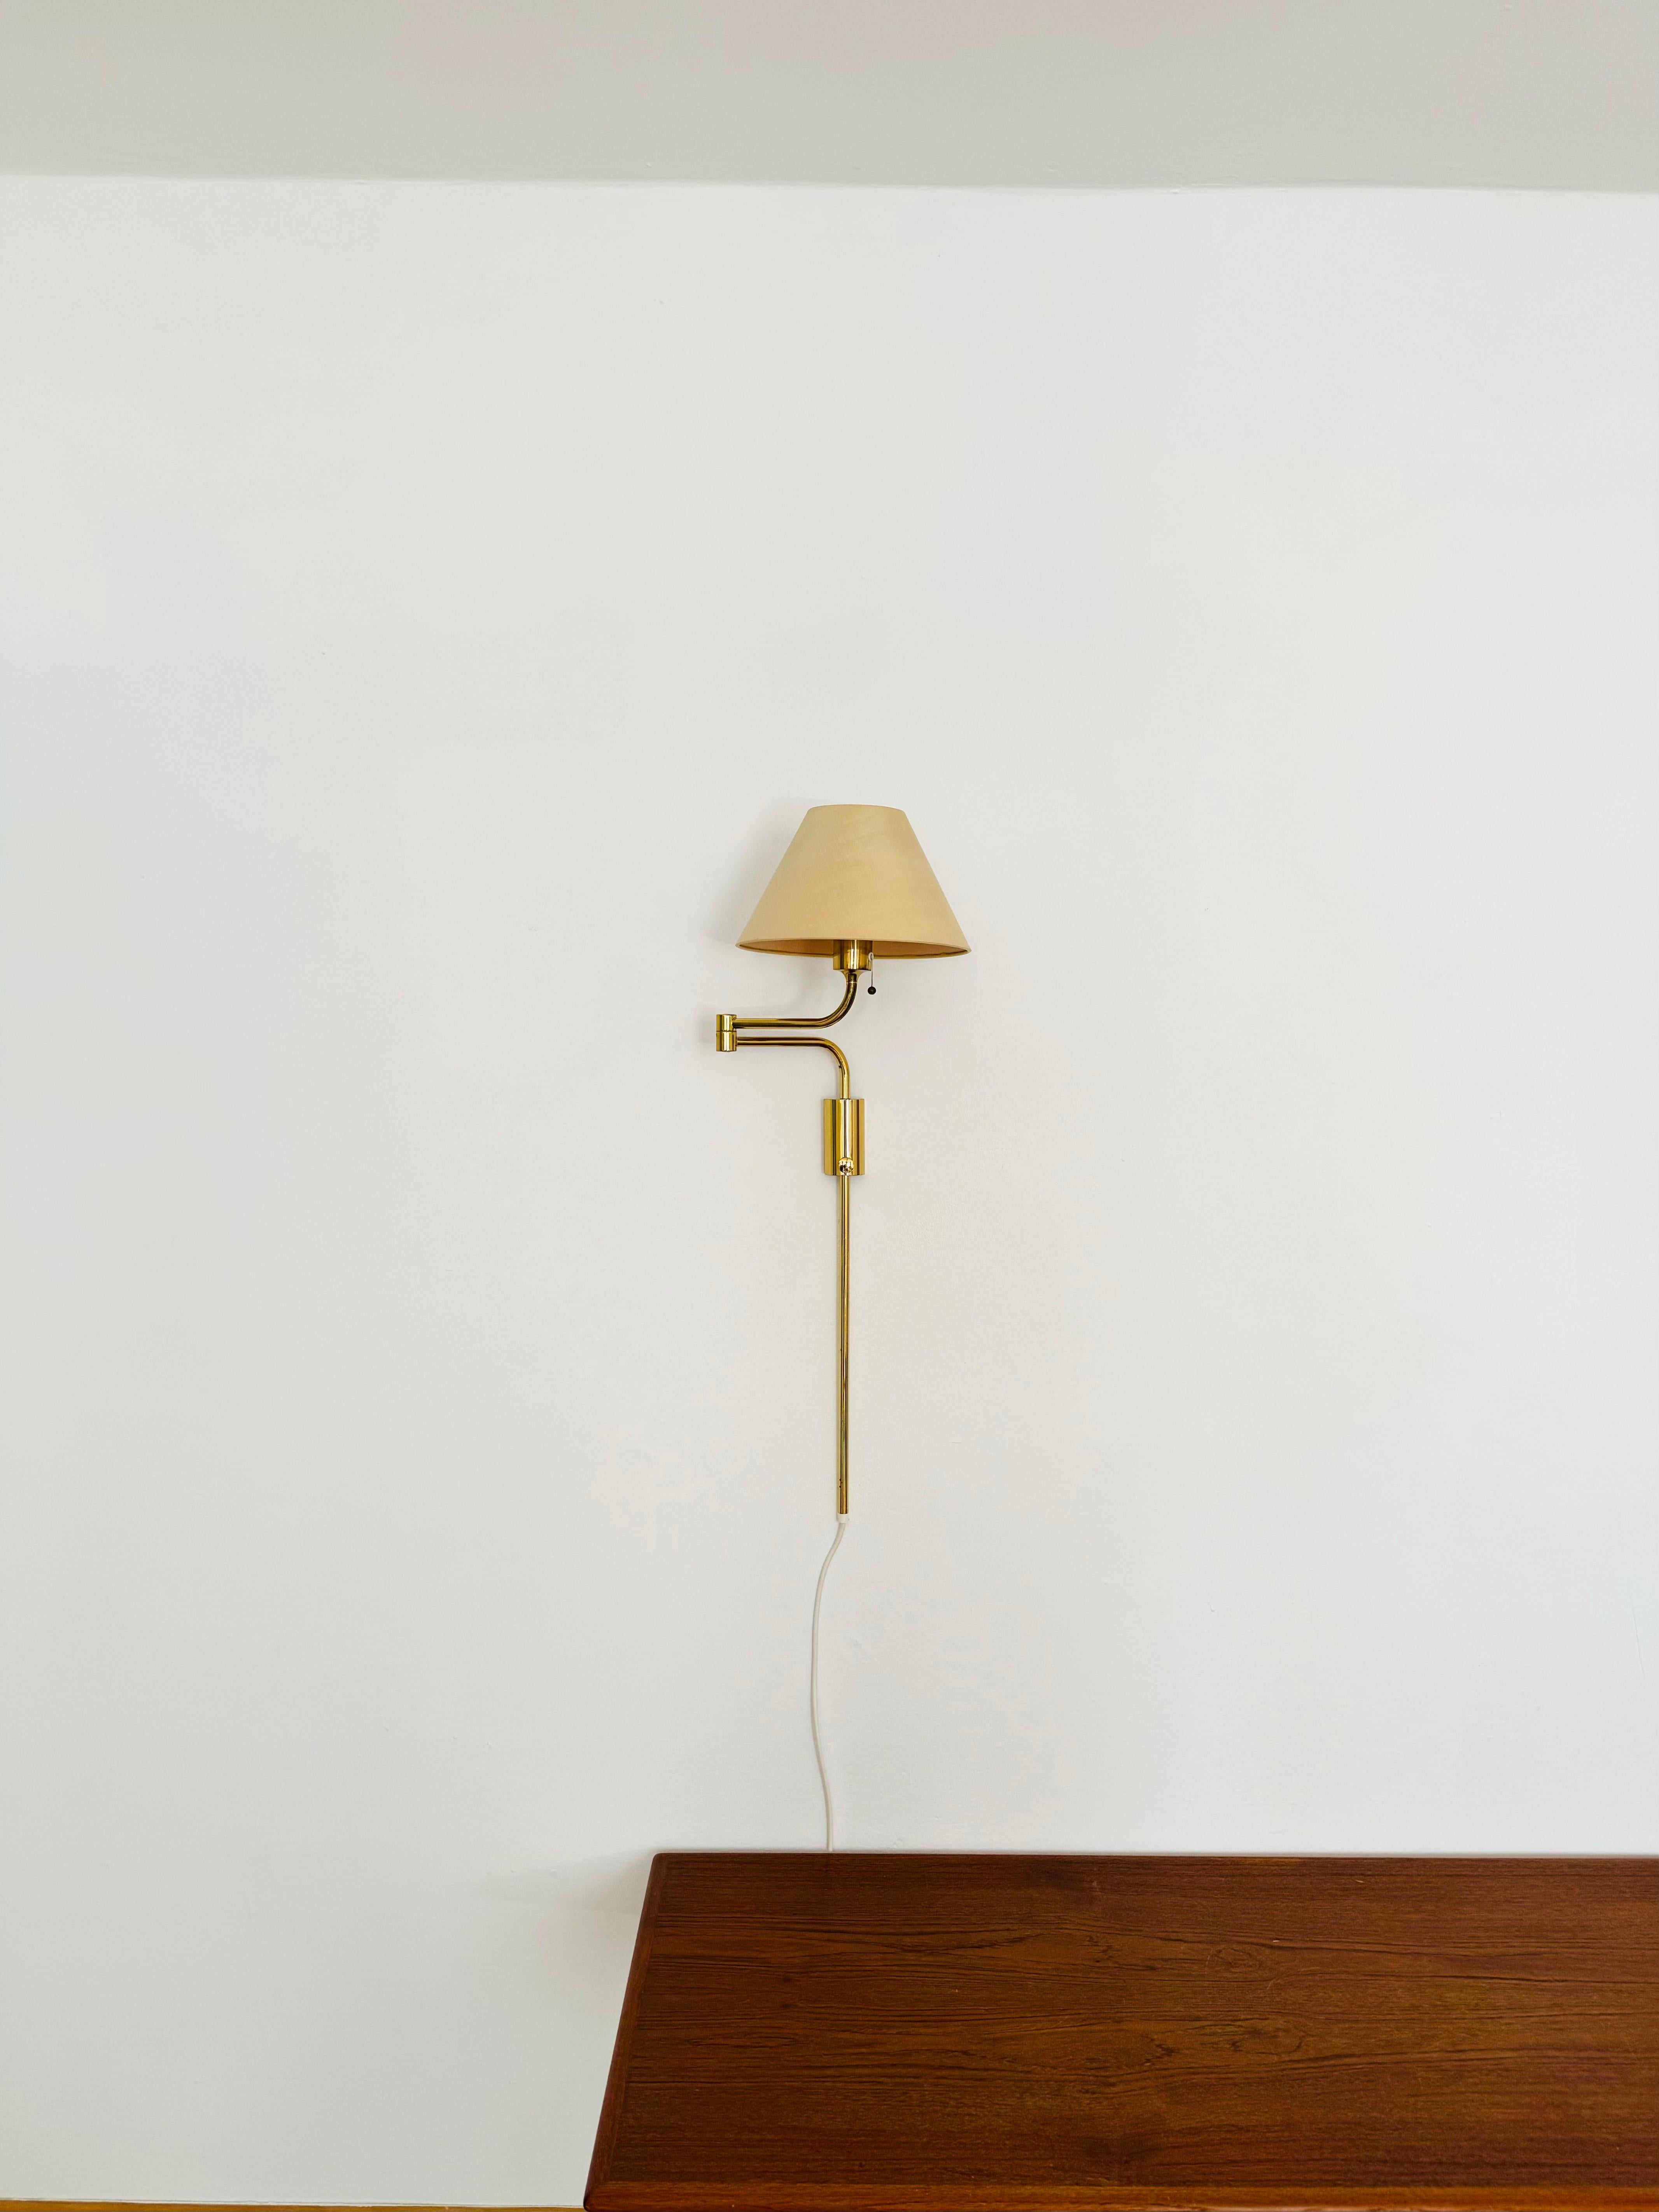 Adjustable Brass Lesan Wall Lamp by Florian Schulz In Good Condition For Sale In München, DE